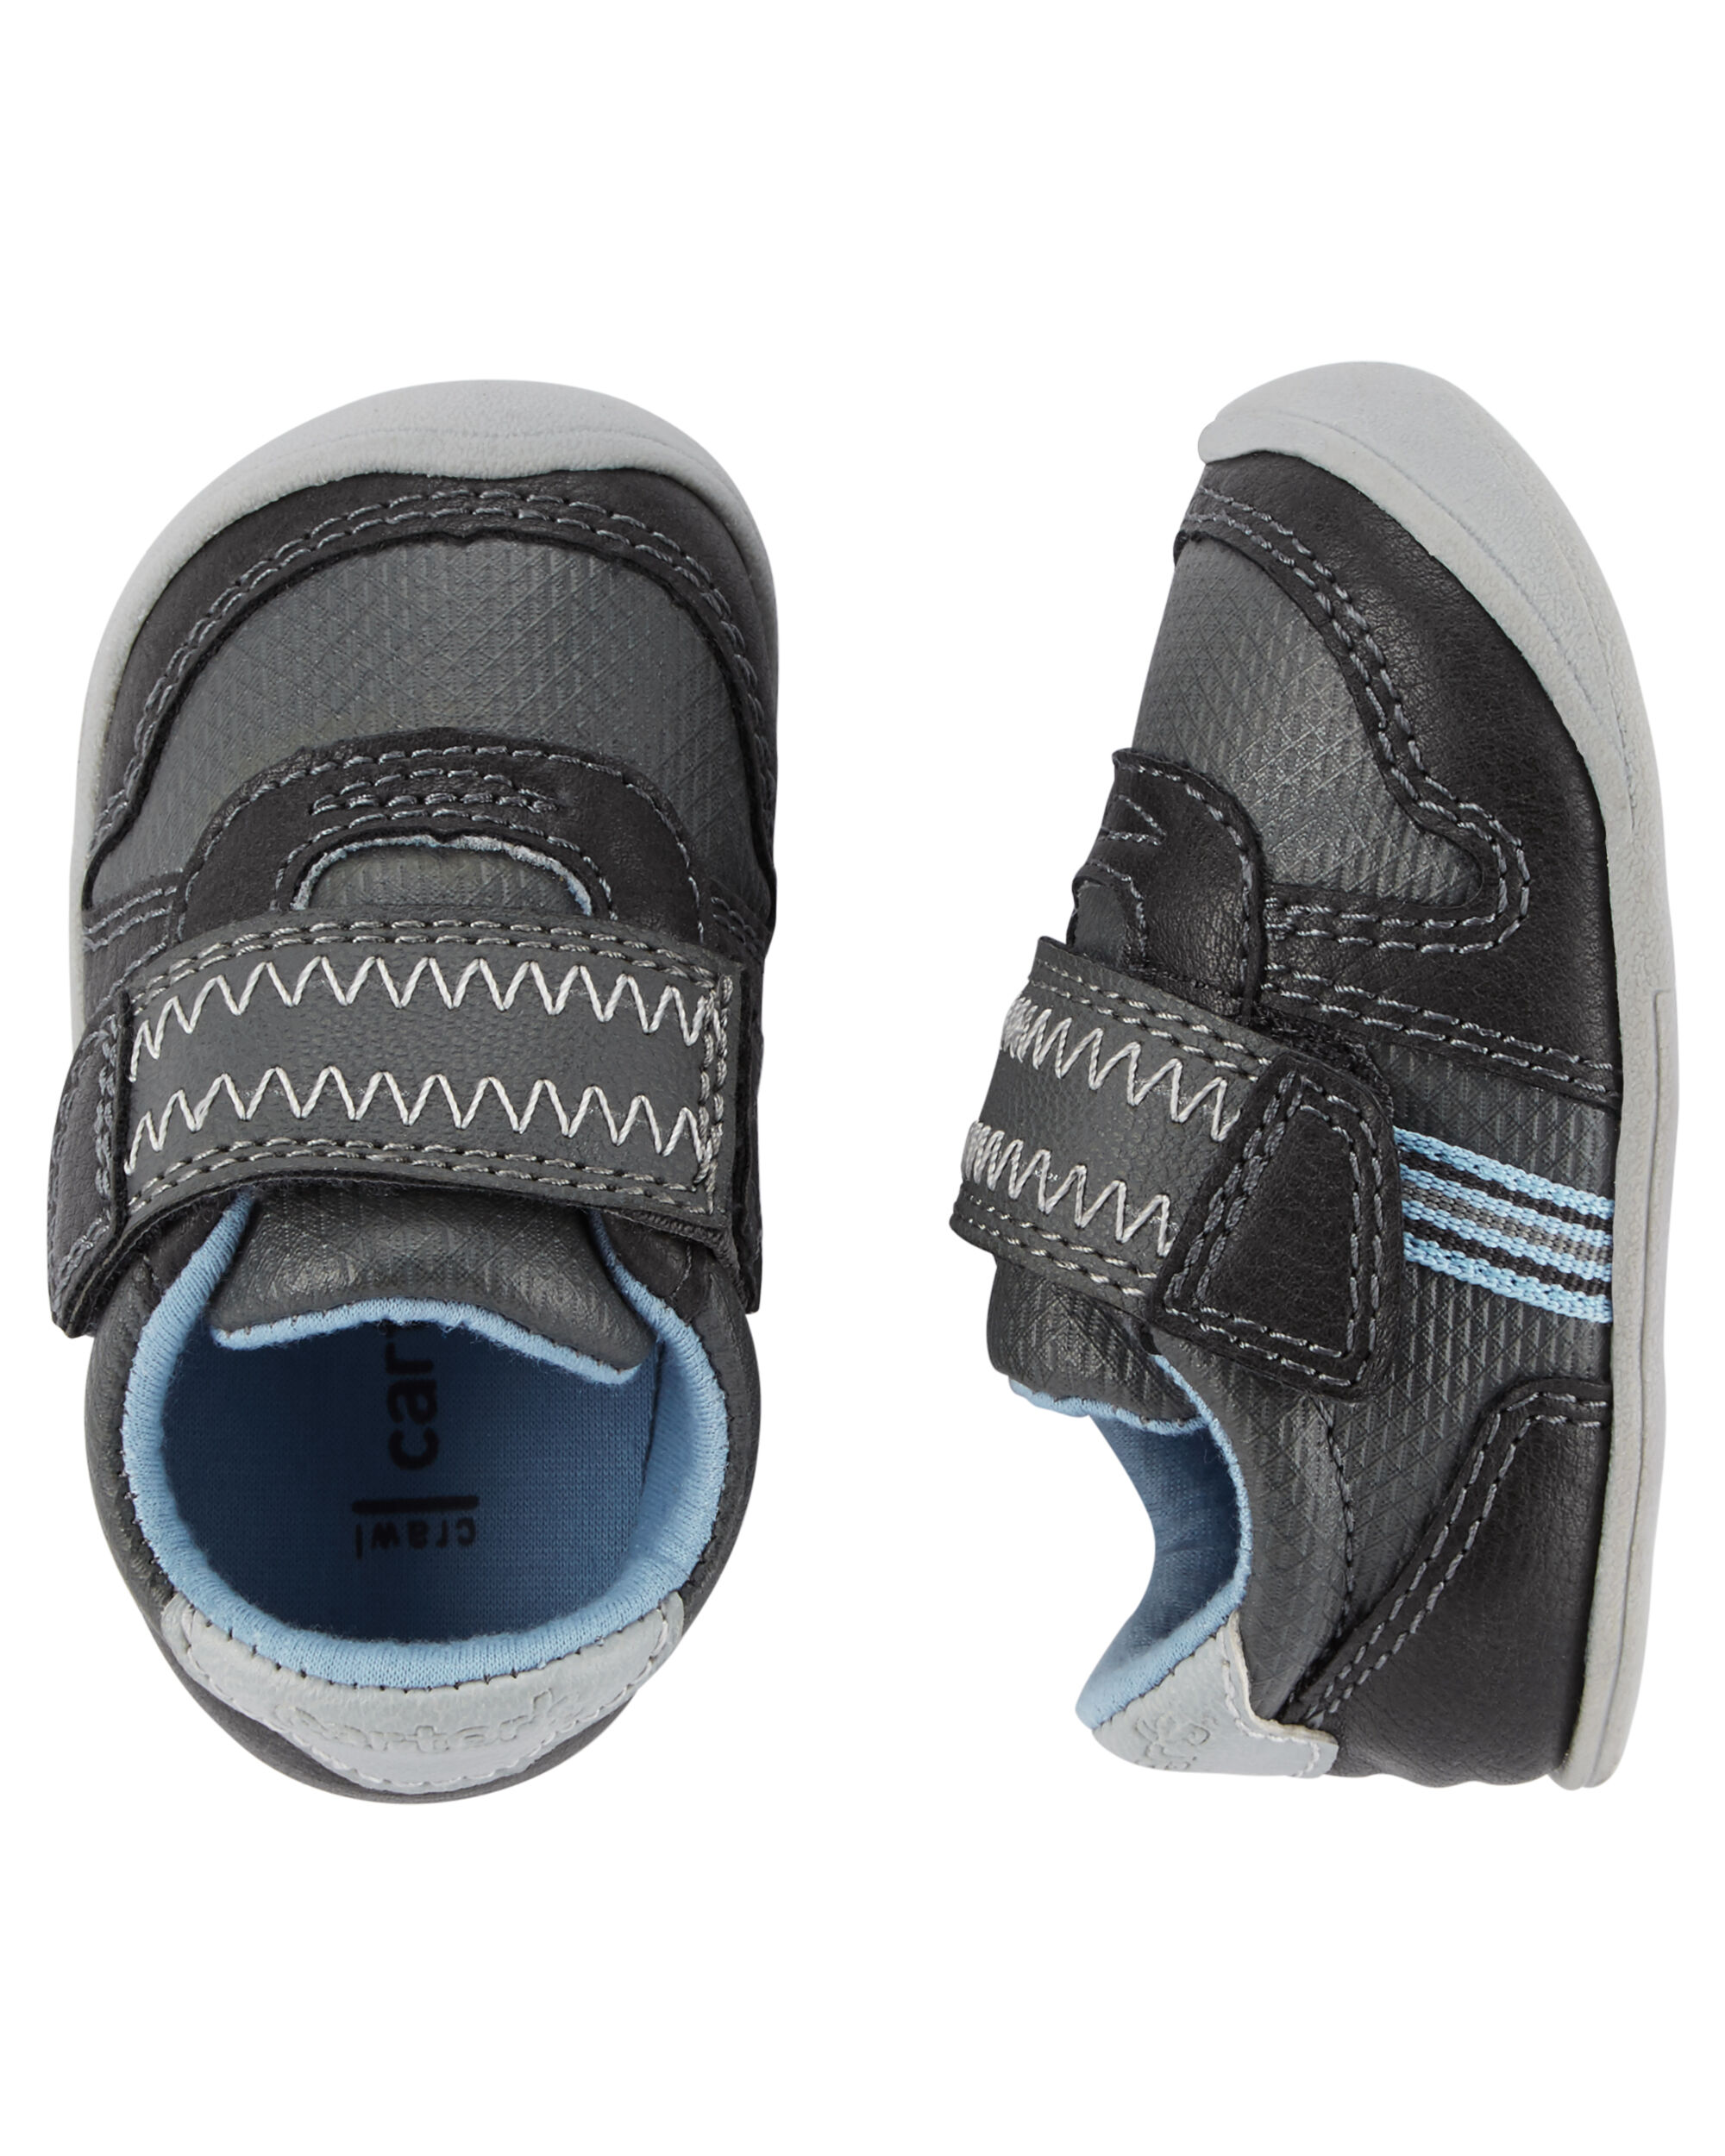 Carter's Every Step Stage 1 Shoe 